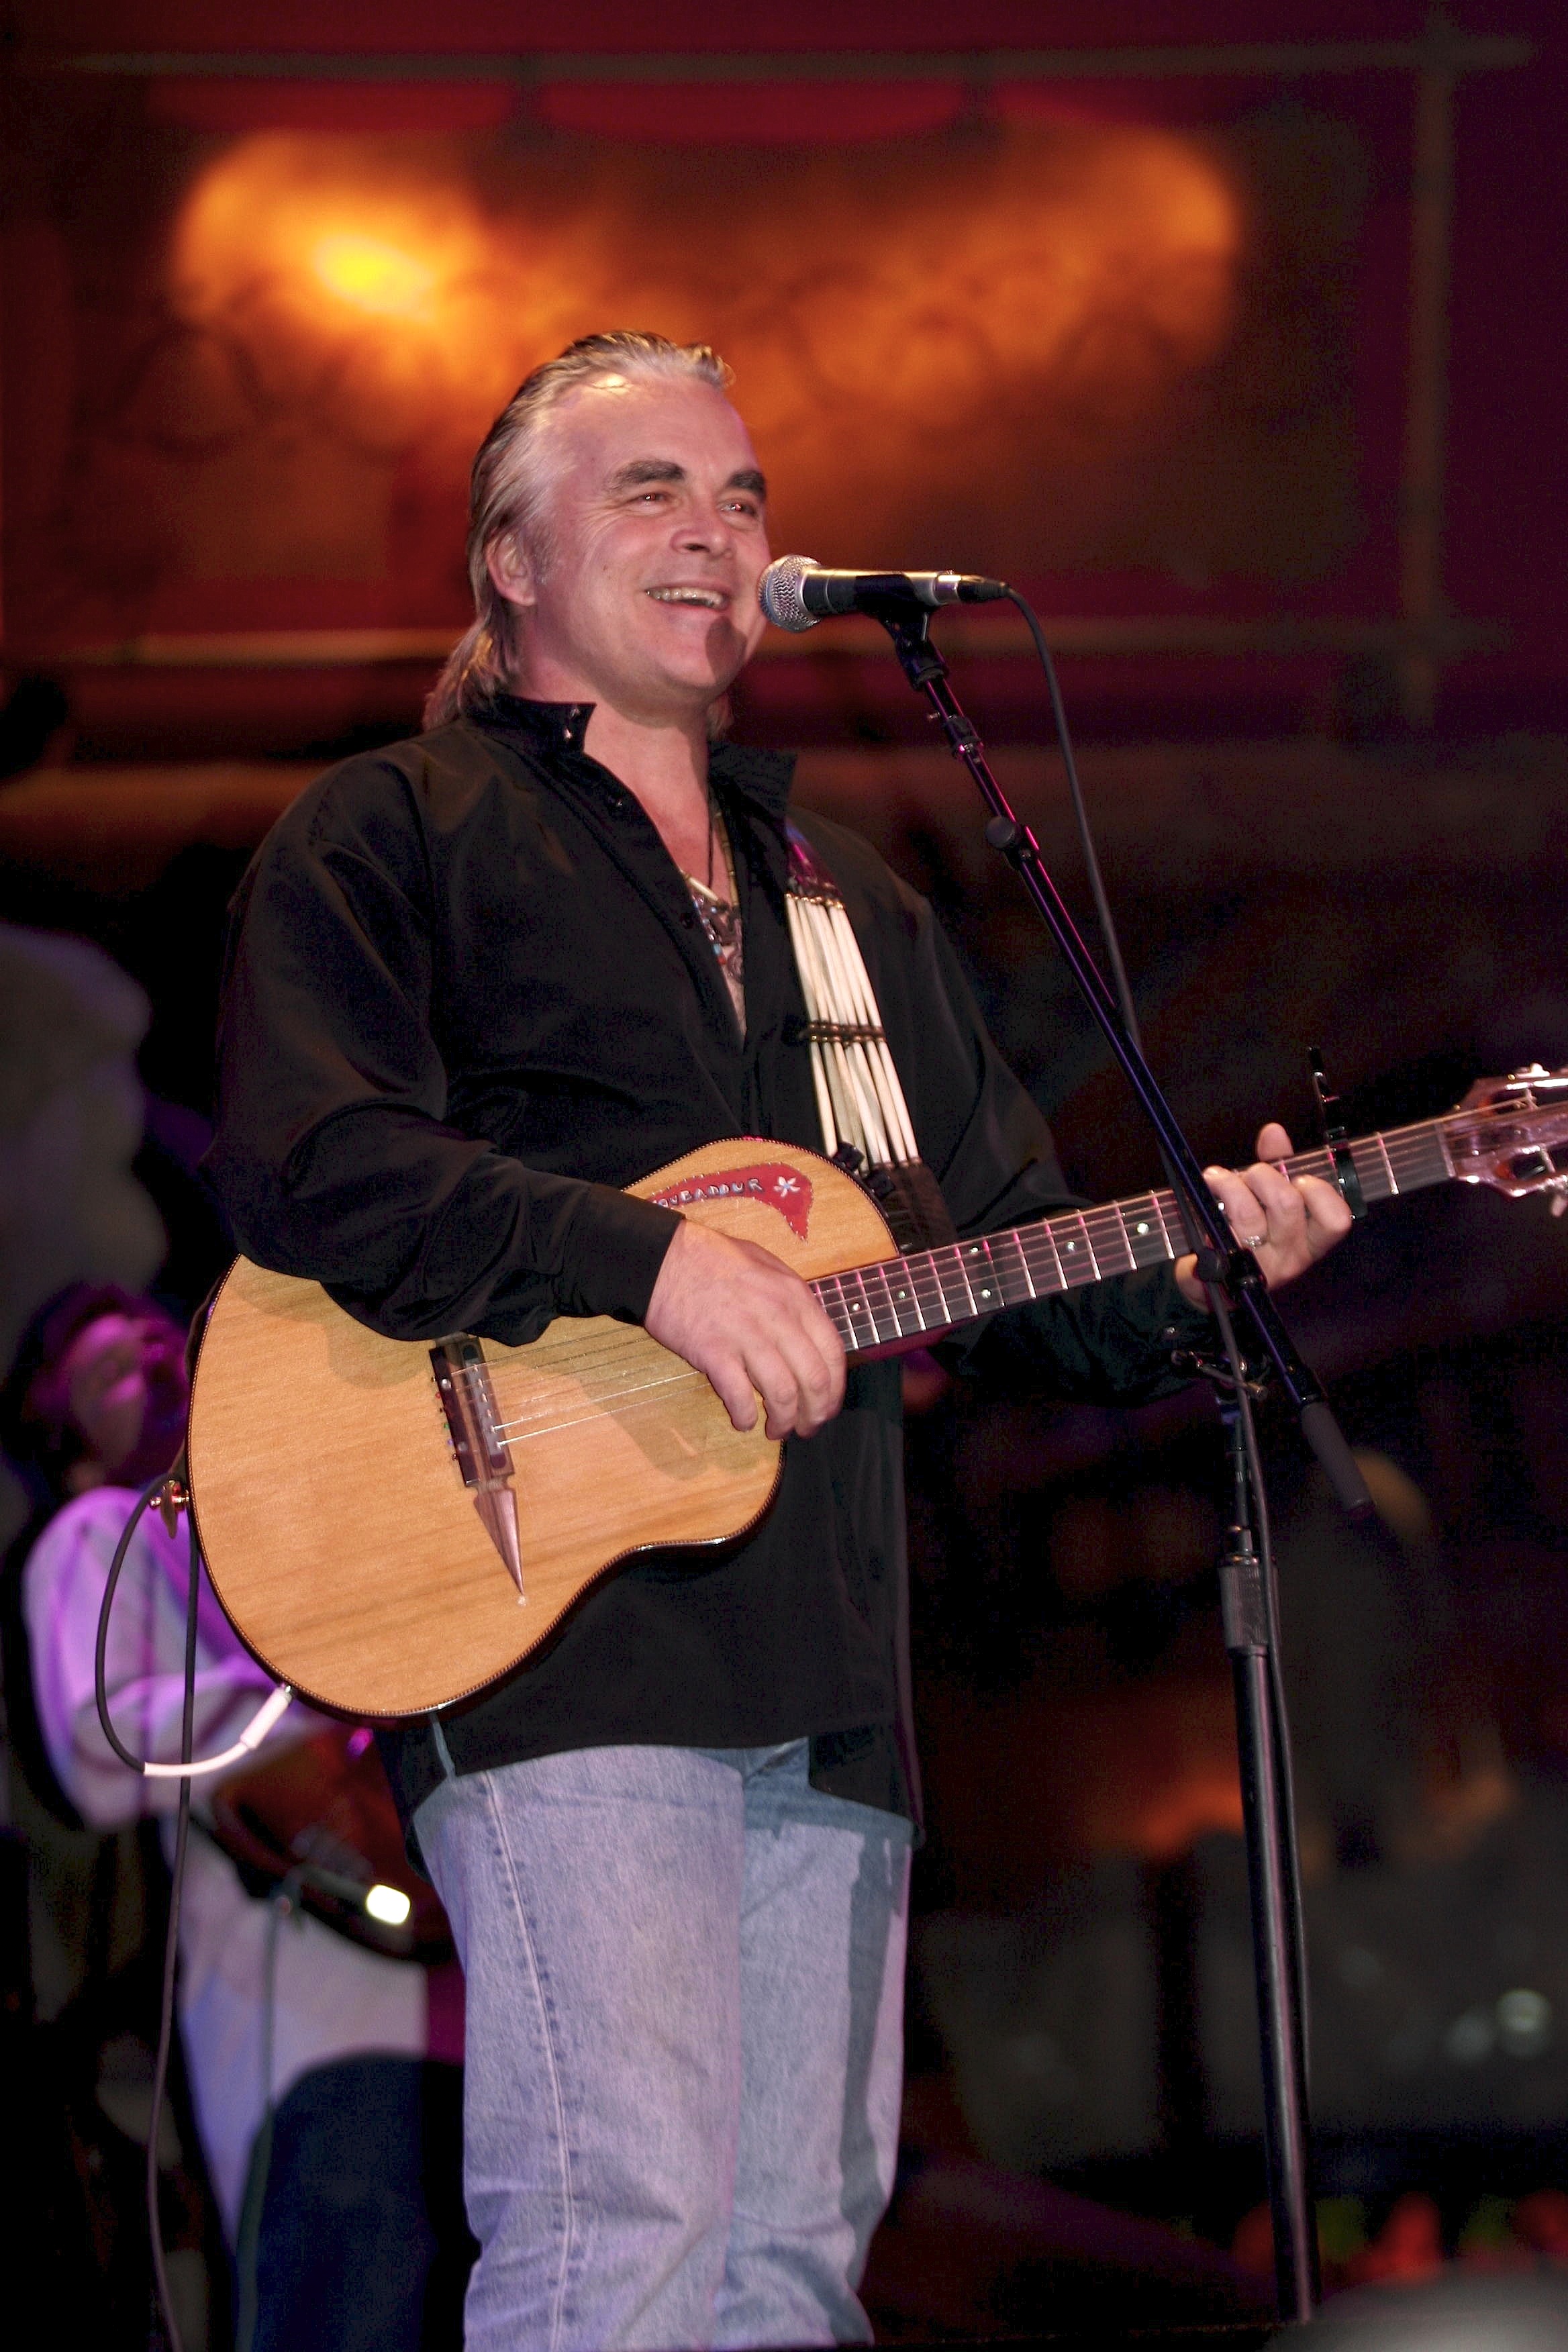 Country music artist Hal Ketchum is shown performing on stage during a "live" concert appearance on February 19, 2006.